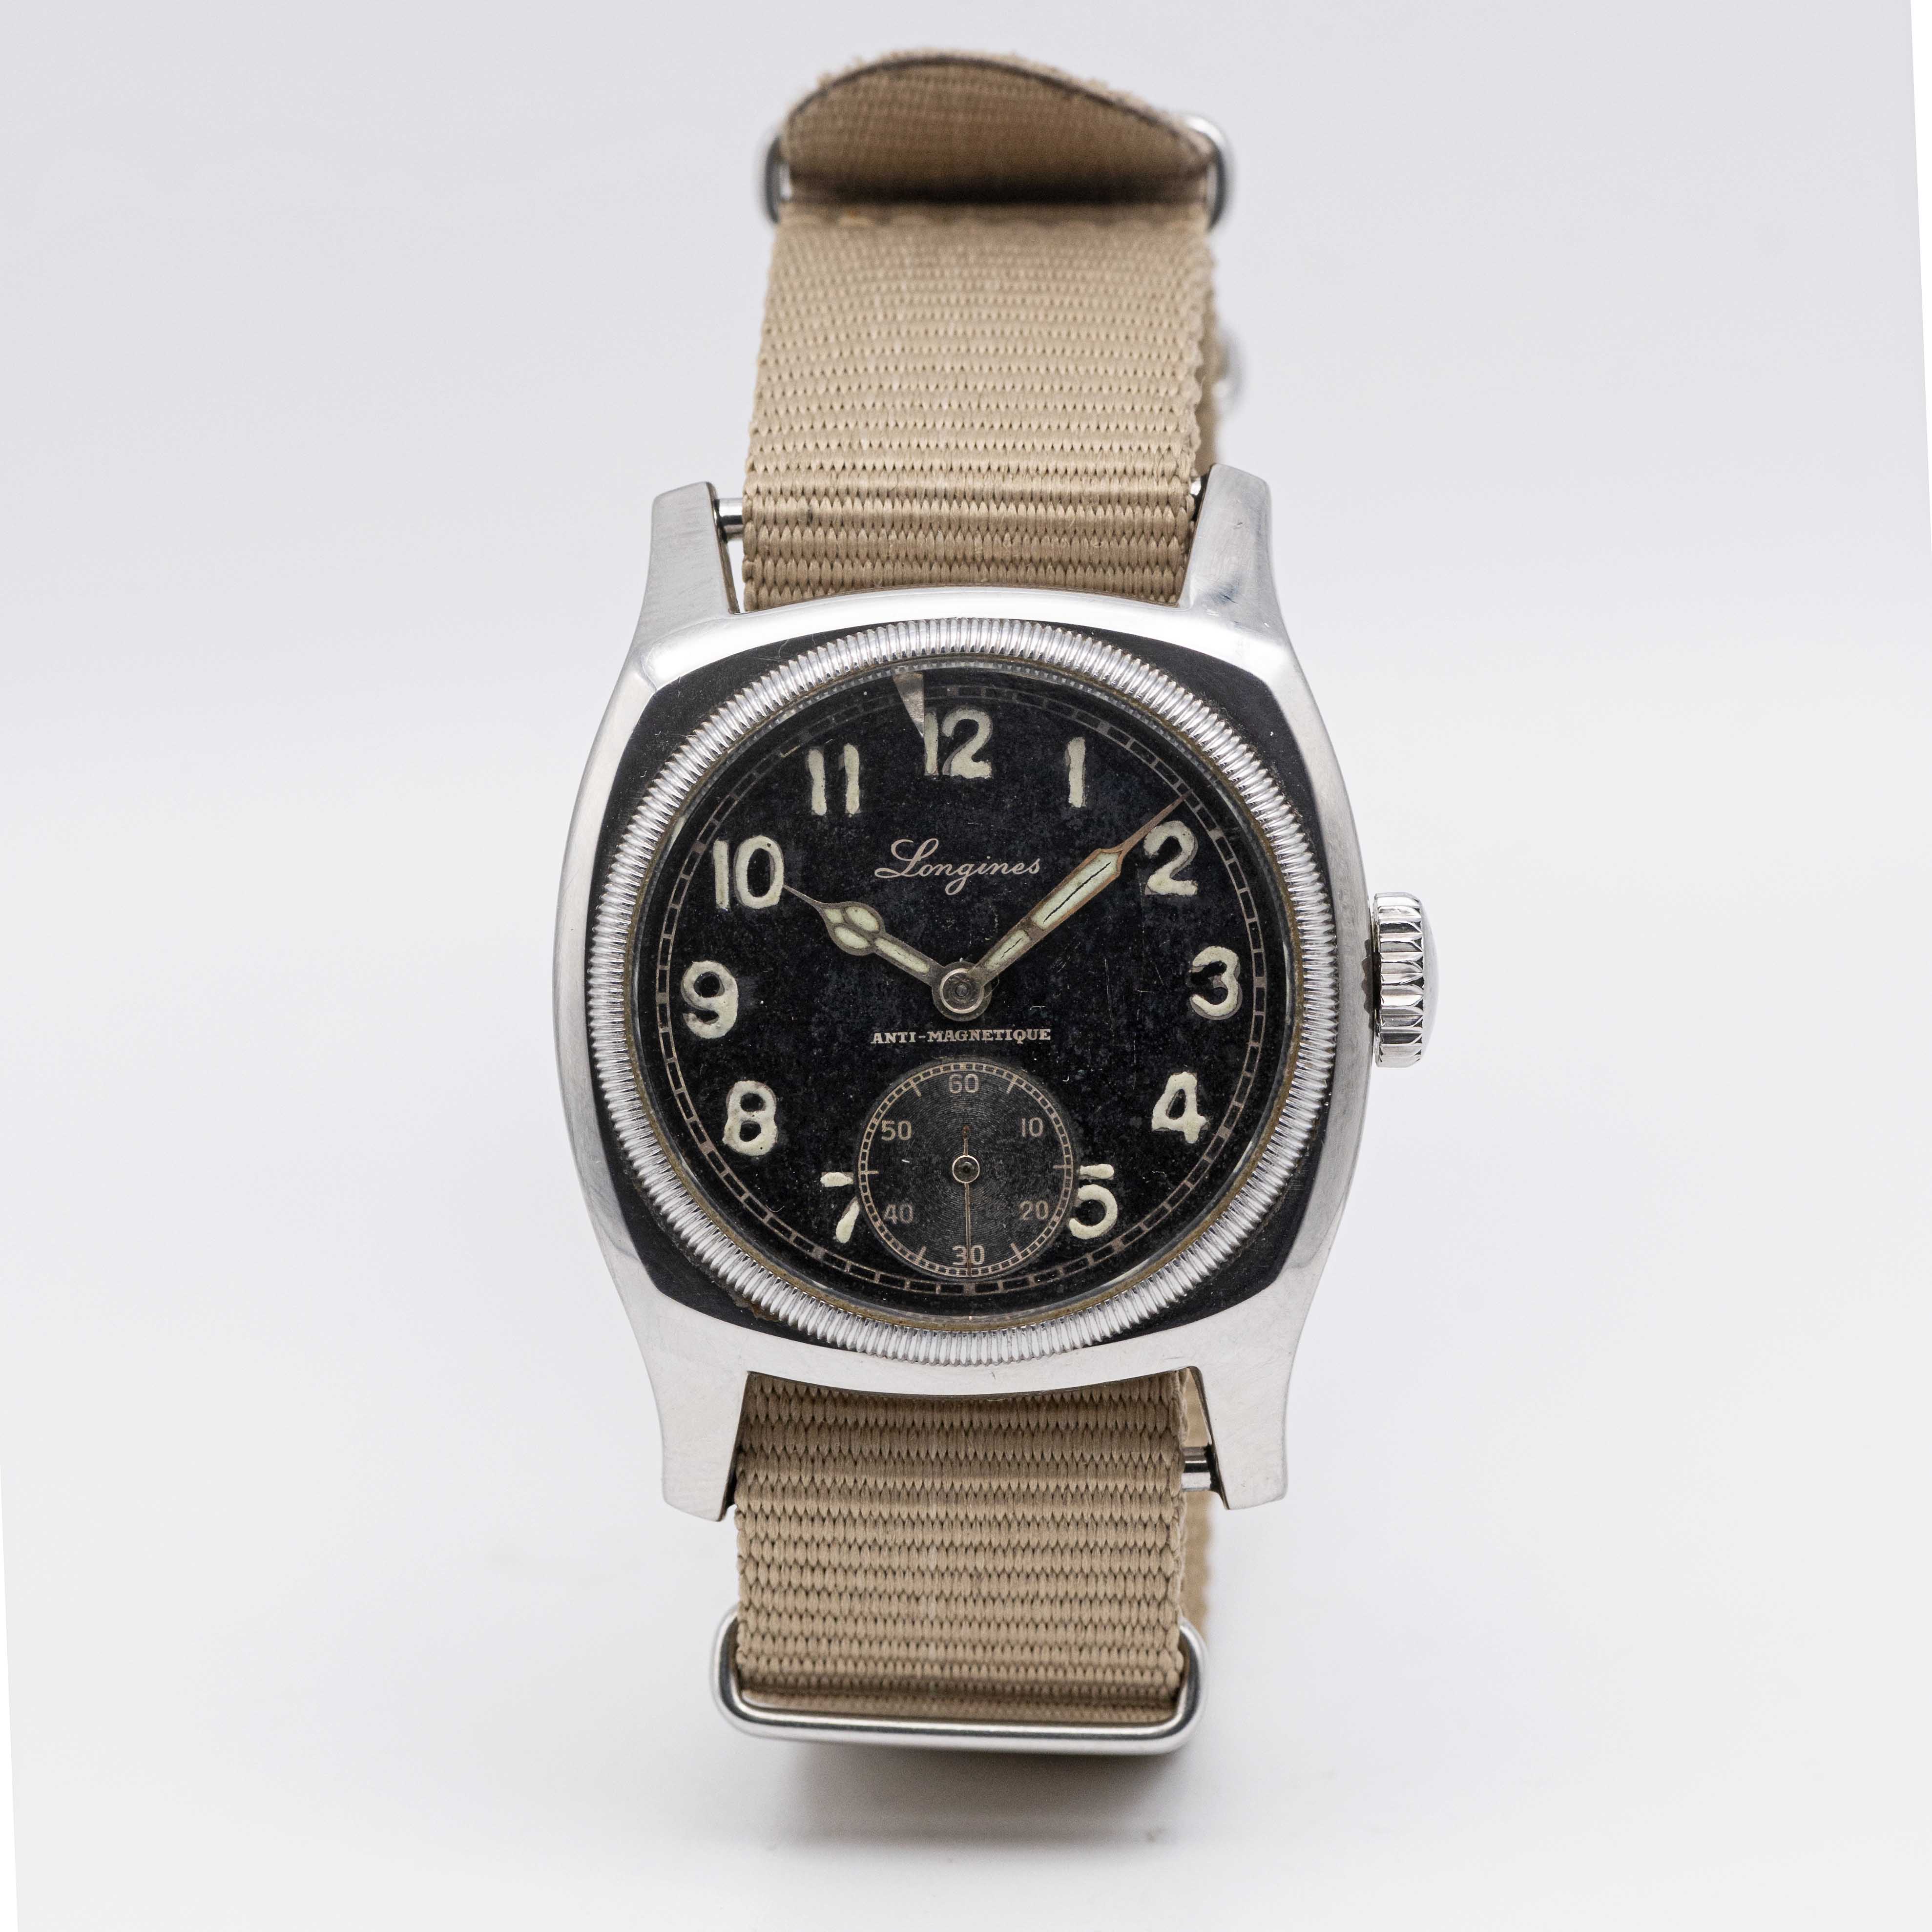 A GENTLEMAN'S STAINLESS STEEL CZECH MILITARY AIR FORCE LONGINES PILOTS WRIST WATCH CIRCA 1947 - Image 2 of 9